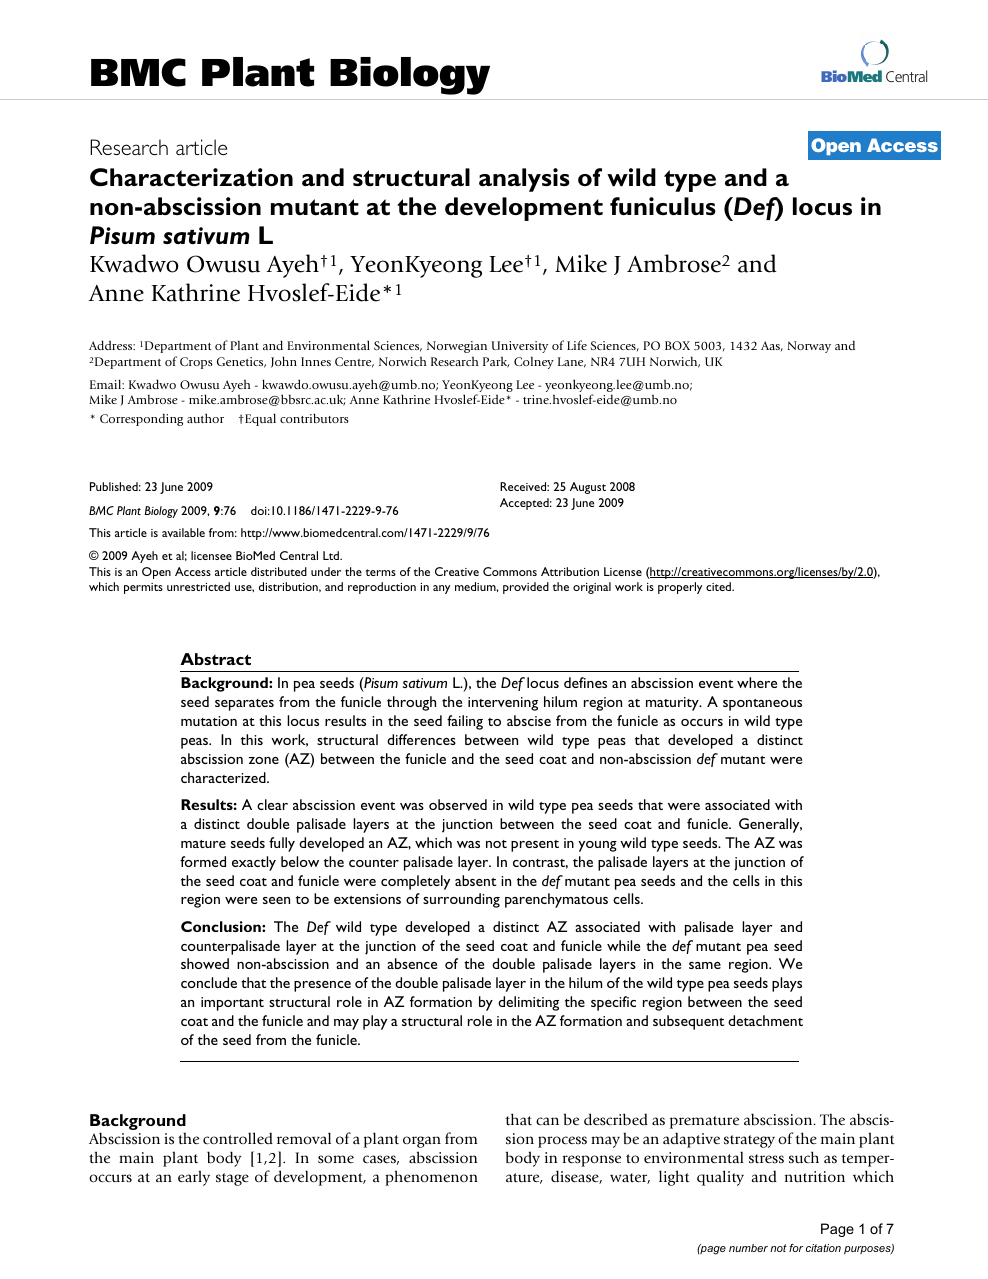 Characterization And Structural Analysis Of Wild Type And A Non